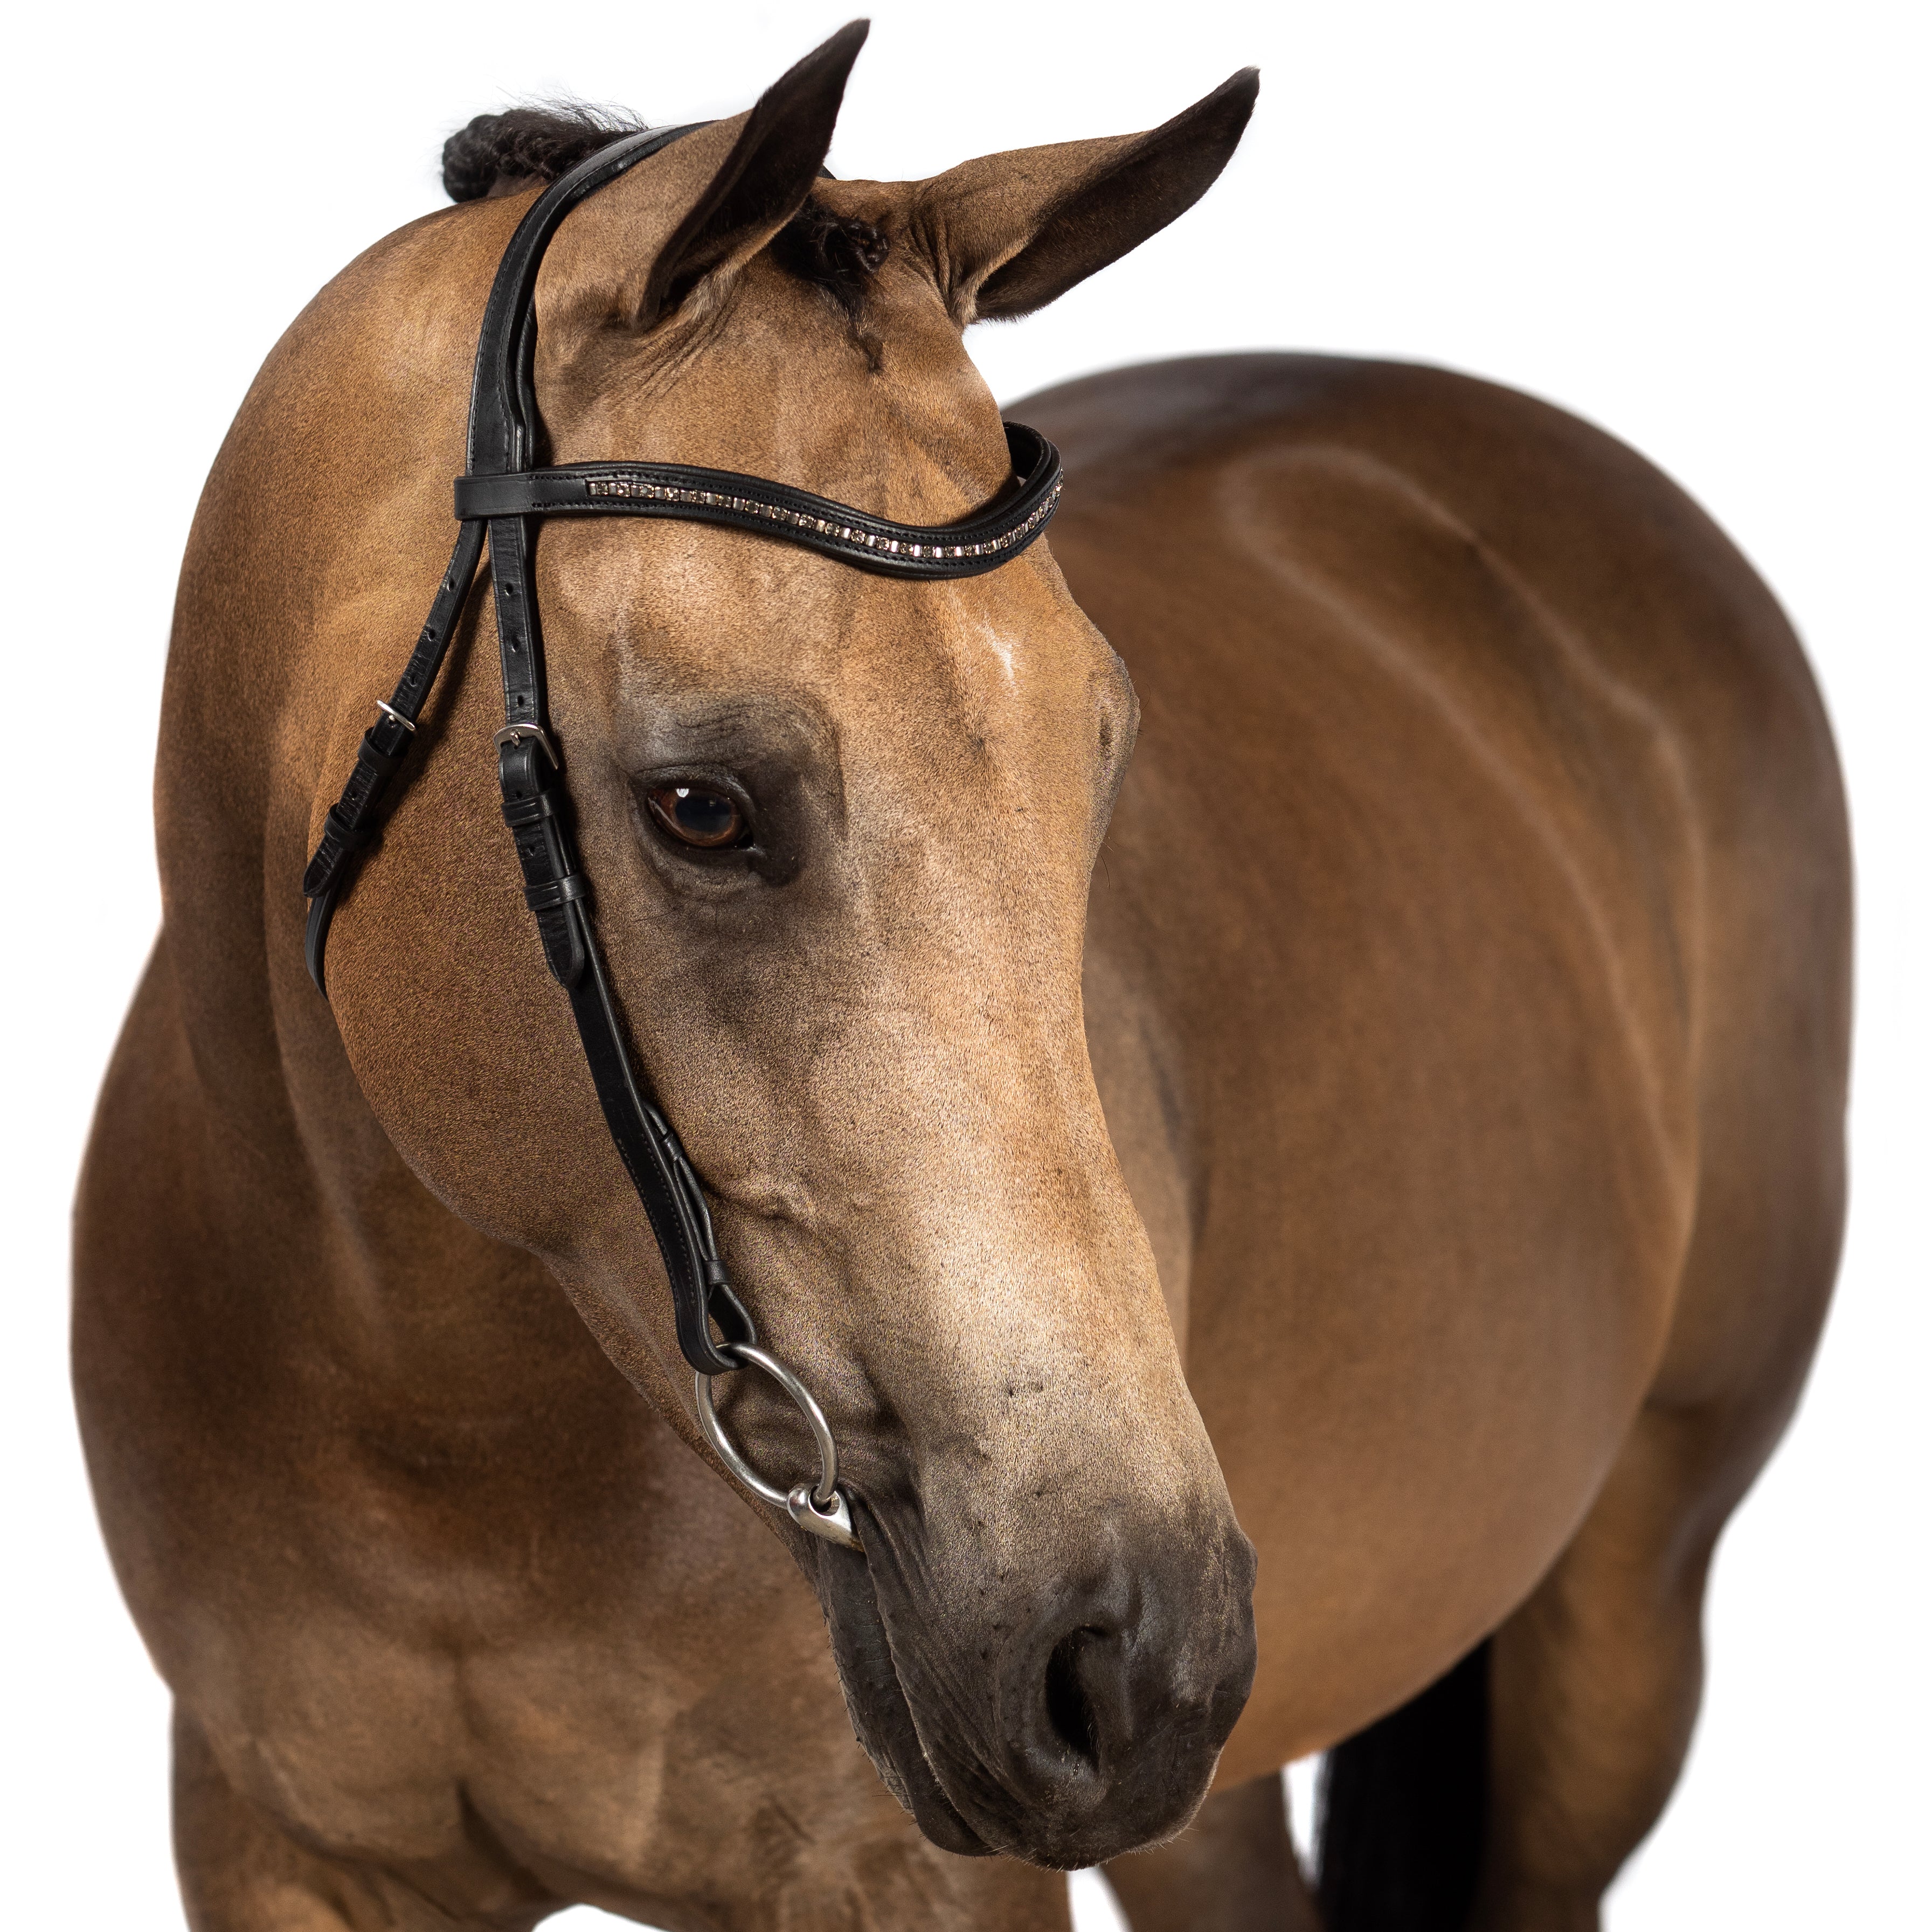 Grey Crystal and Mini Clincher Wave Gel Browband - Black